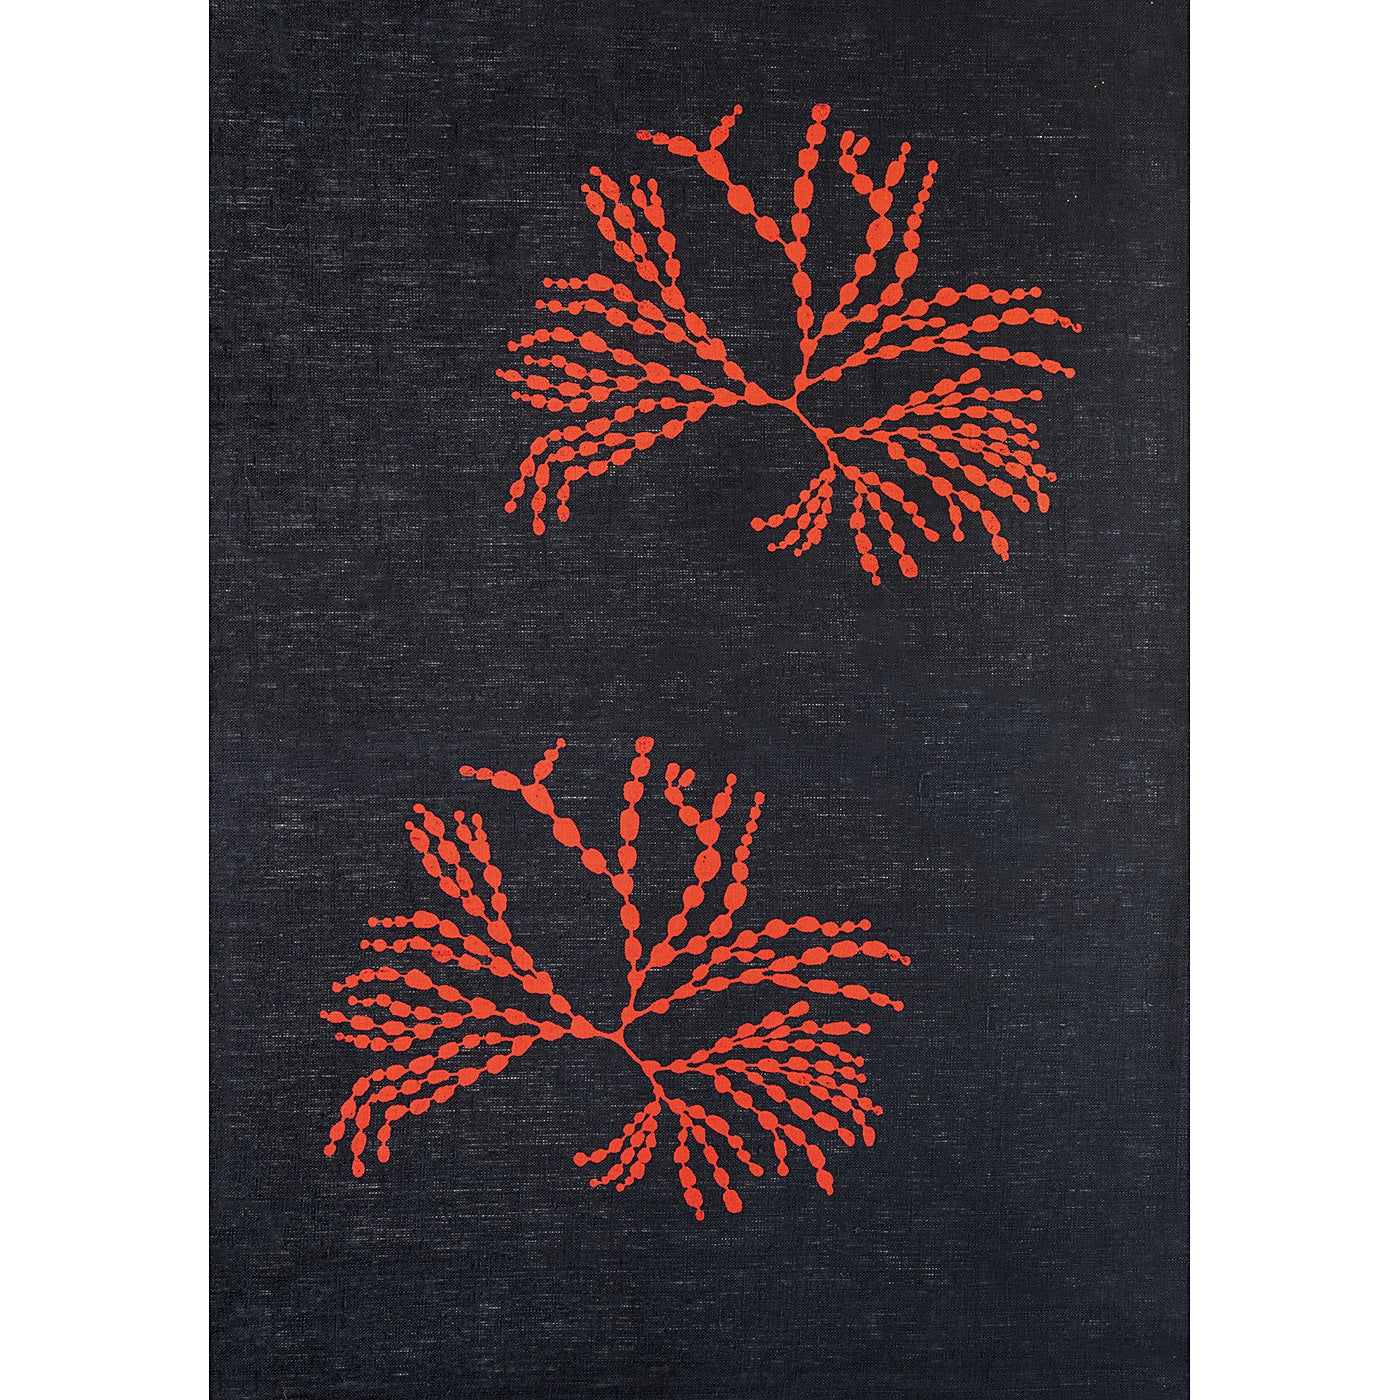 Stalley Textile Co. - Tea Towel - Bubbleweed - Red on Black